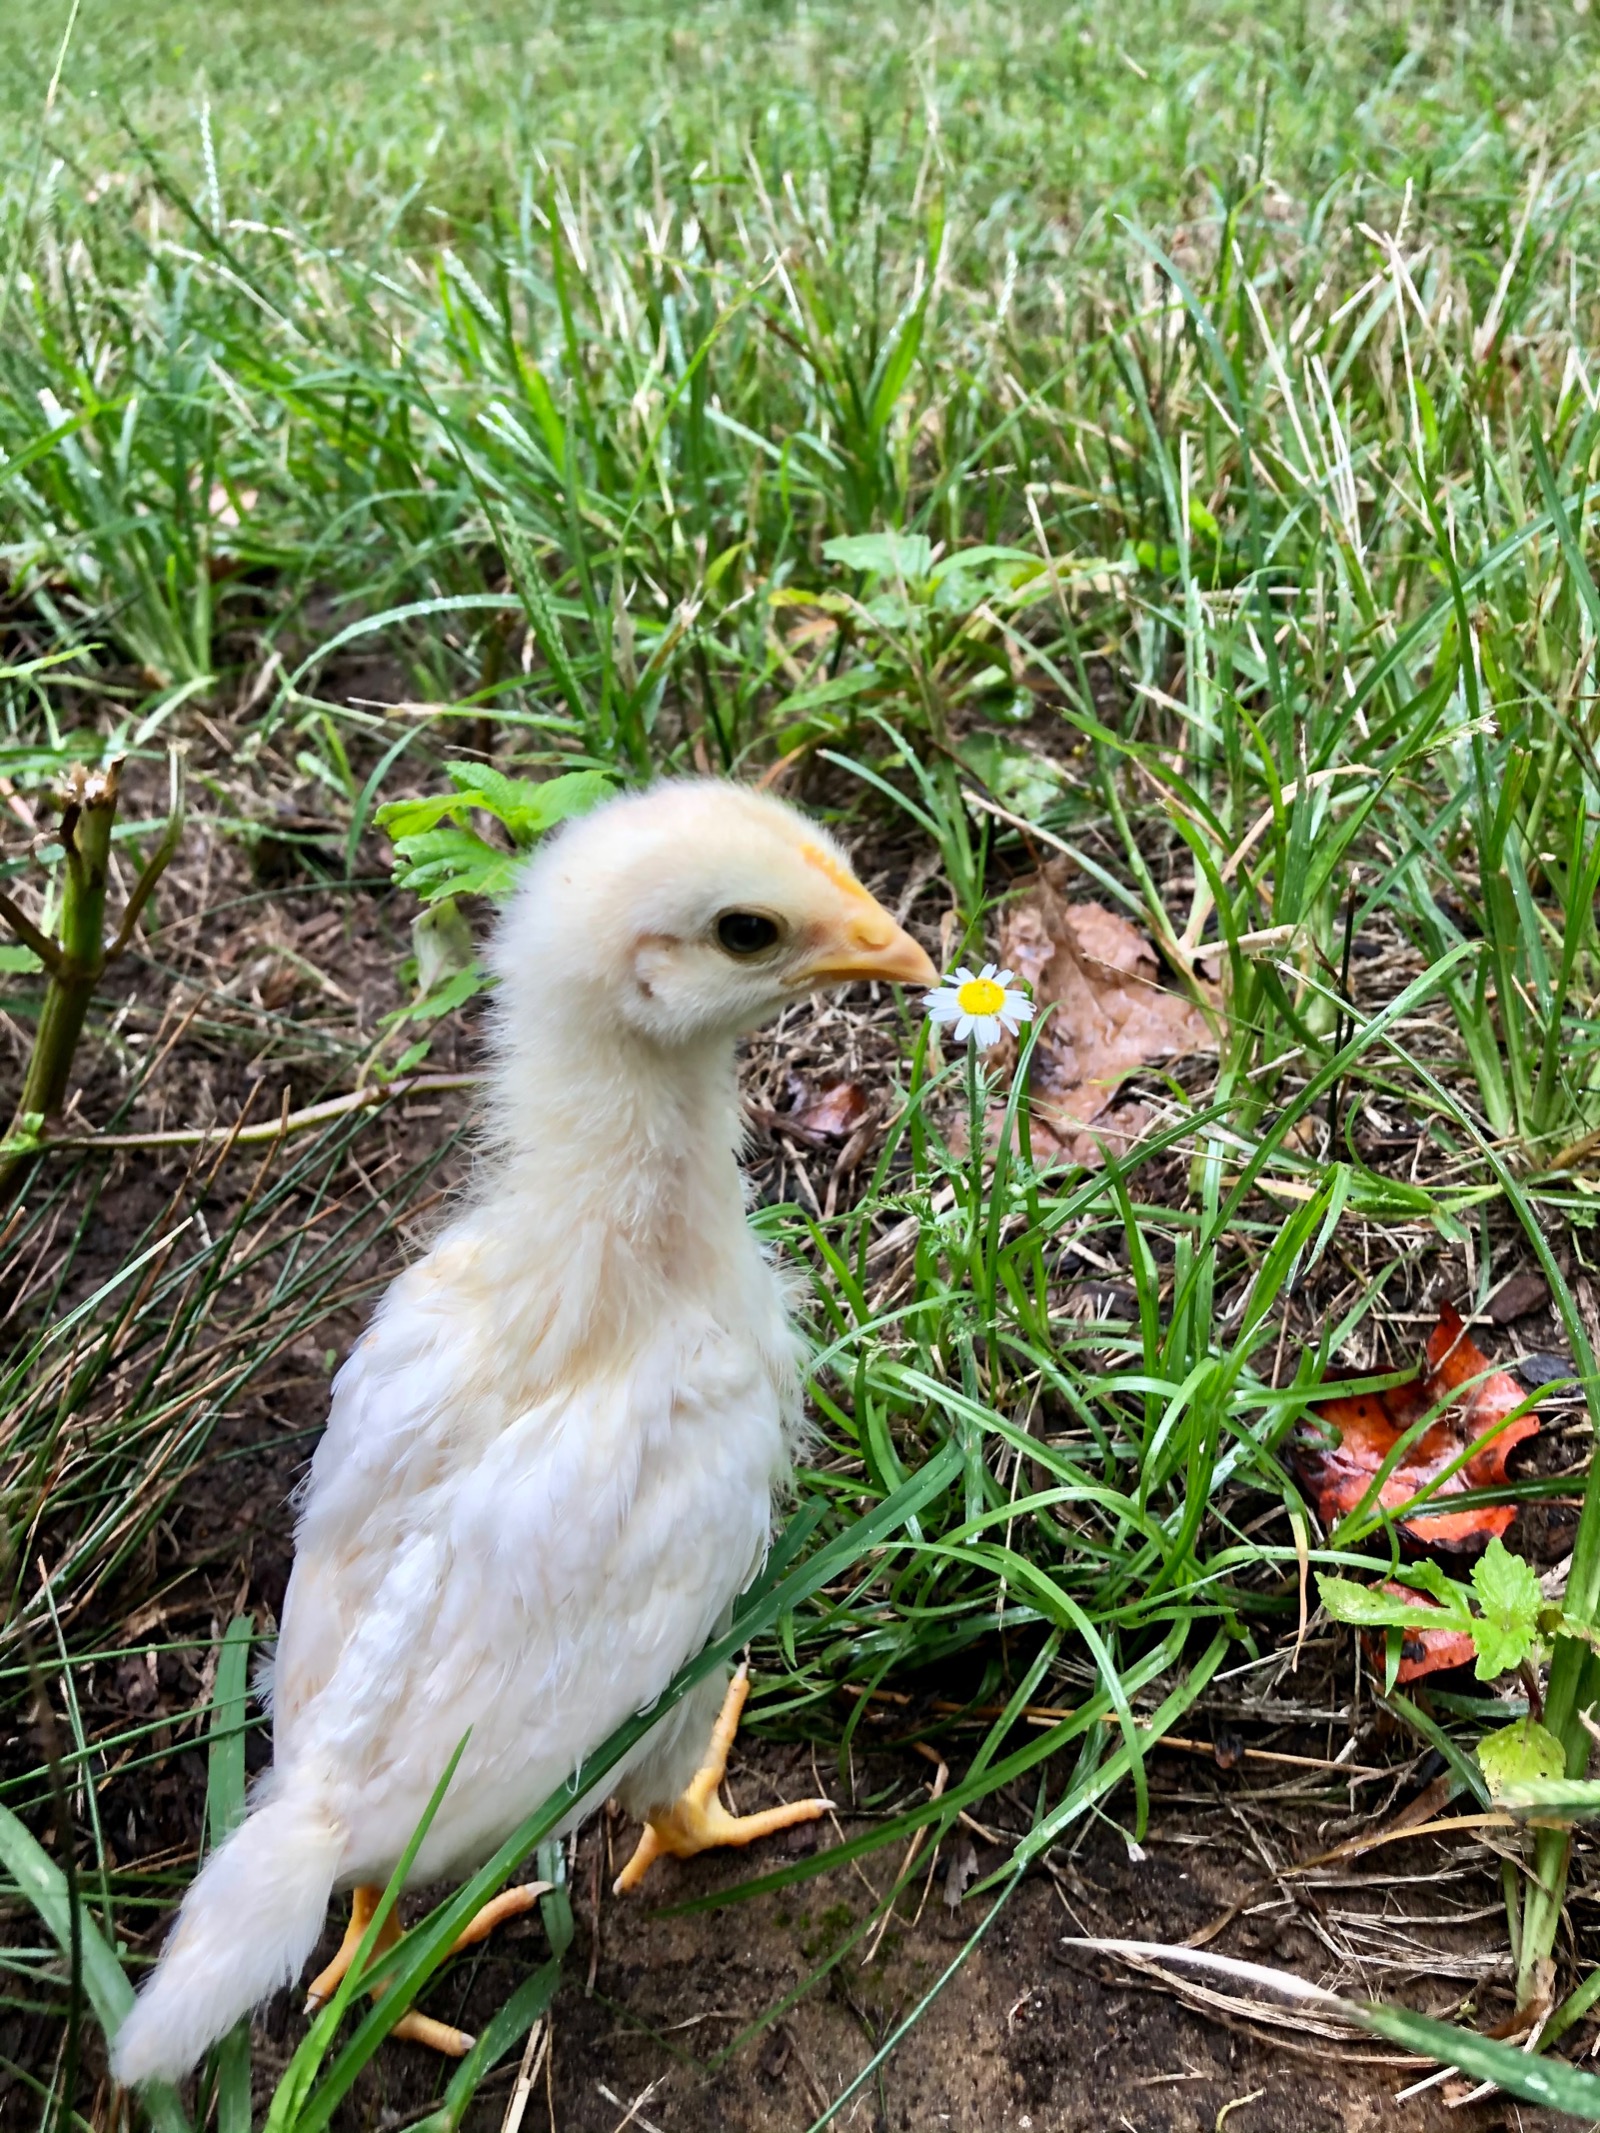 Brooding Fall Chicks | Juvenile Chick in Grass